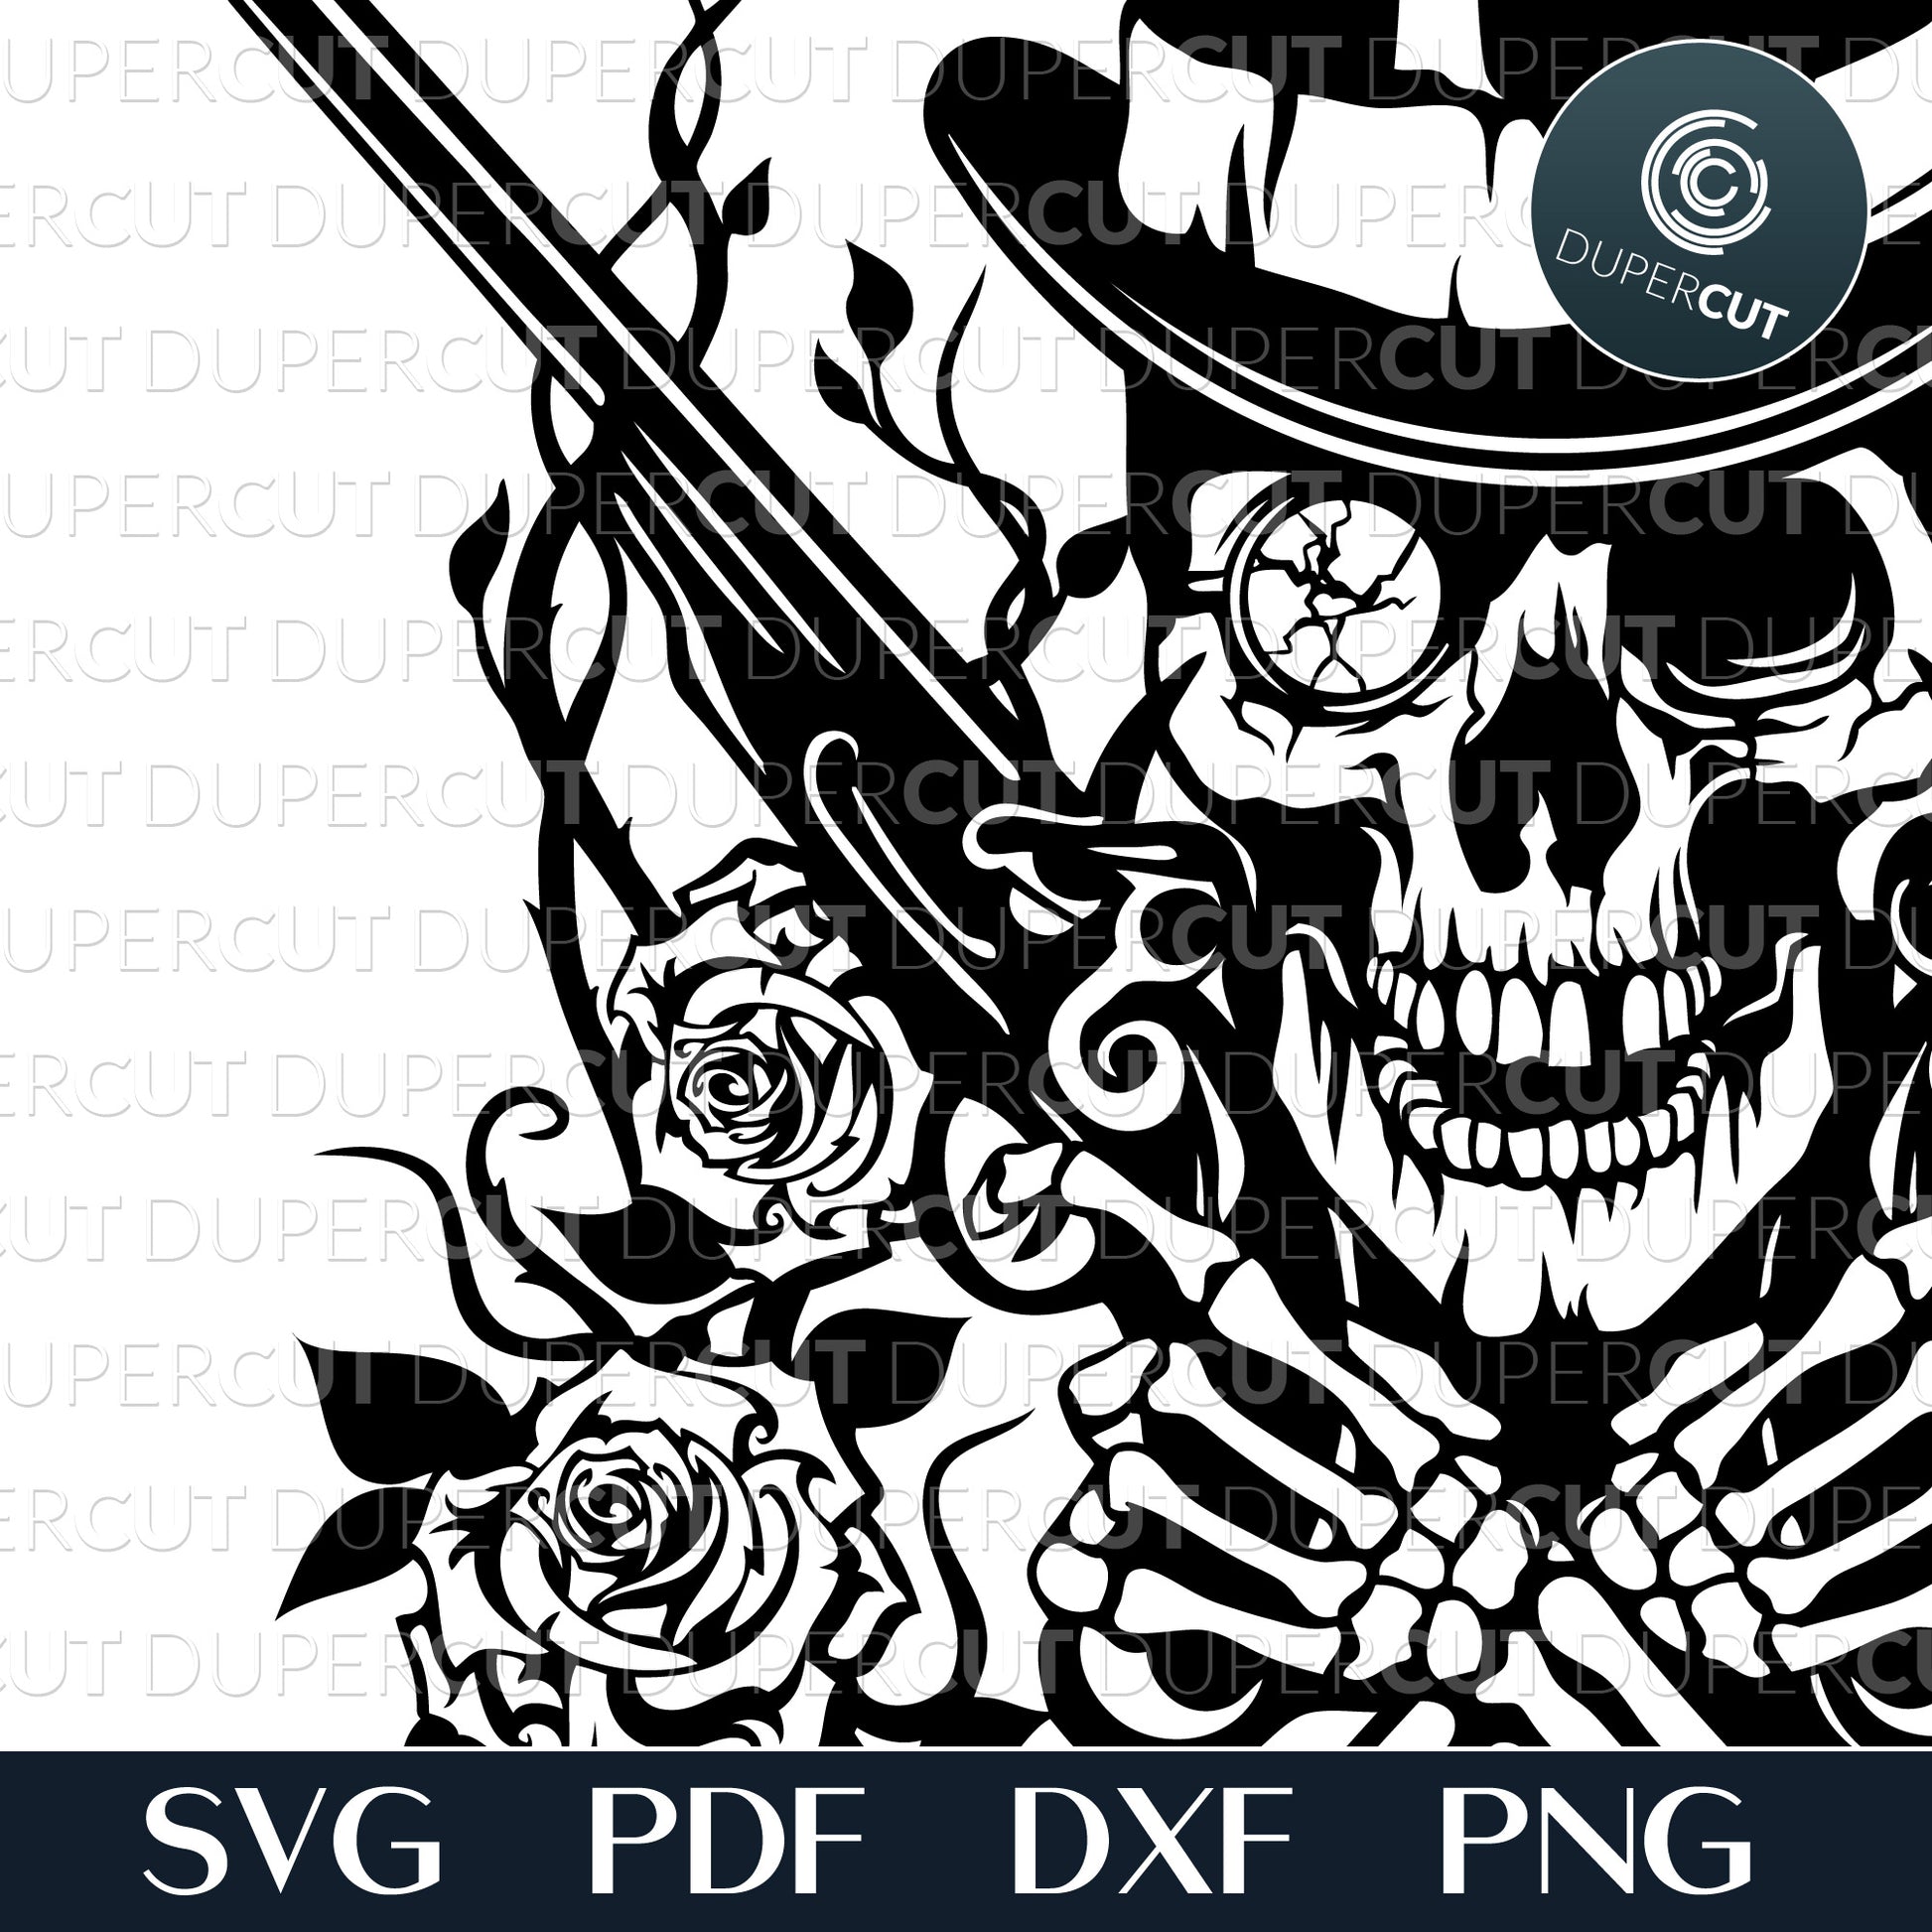 Skull with guns, black gothic tattoo line drawing. Papercutting template for commercial use. SVG files for Silhouette Cameo, Cricut, Glowforge, DXF for CNC, laser cutting, print on demand